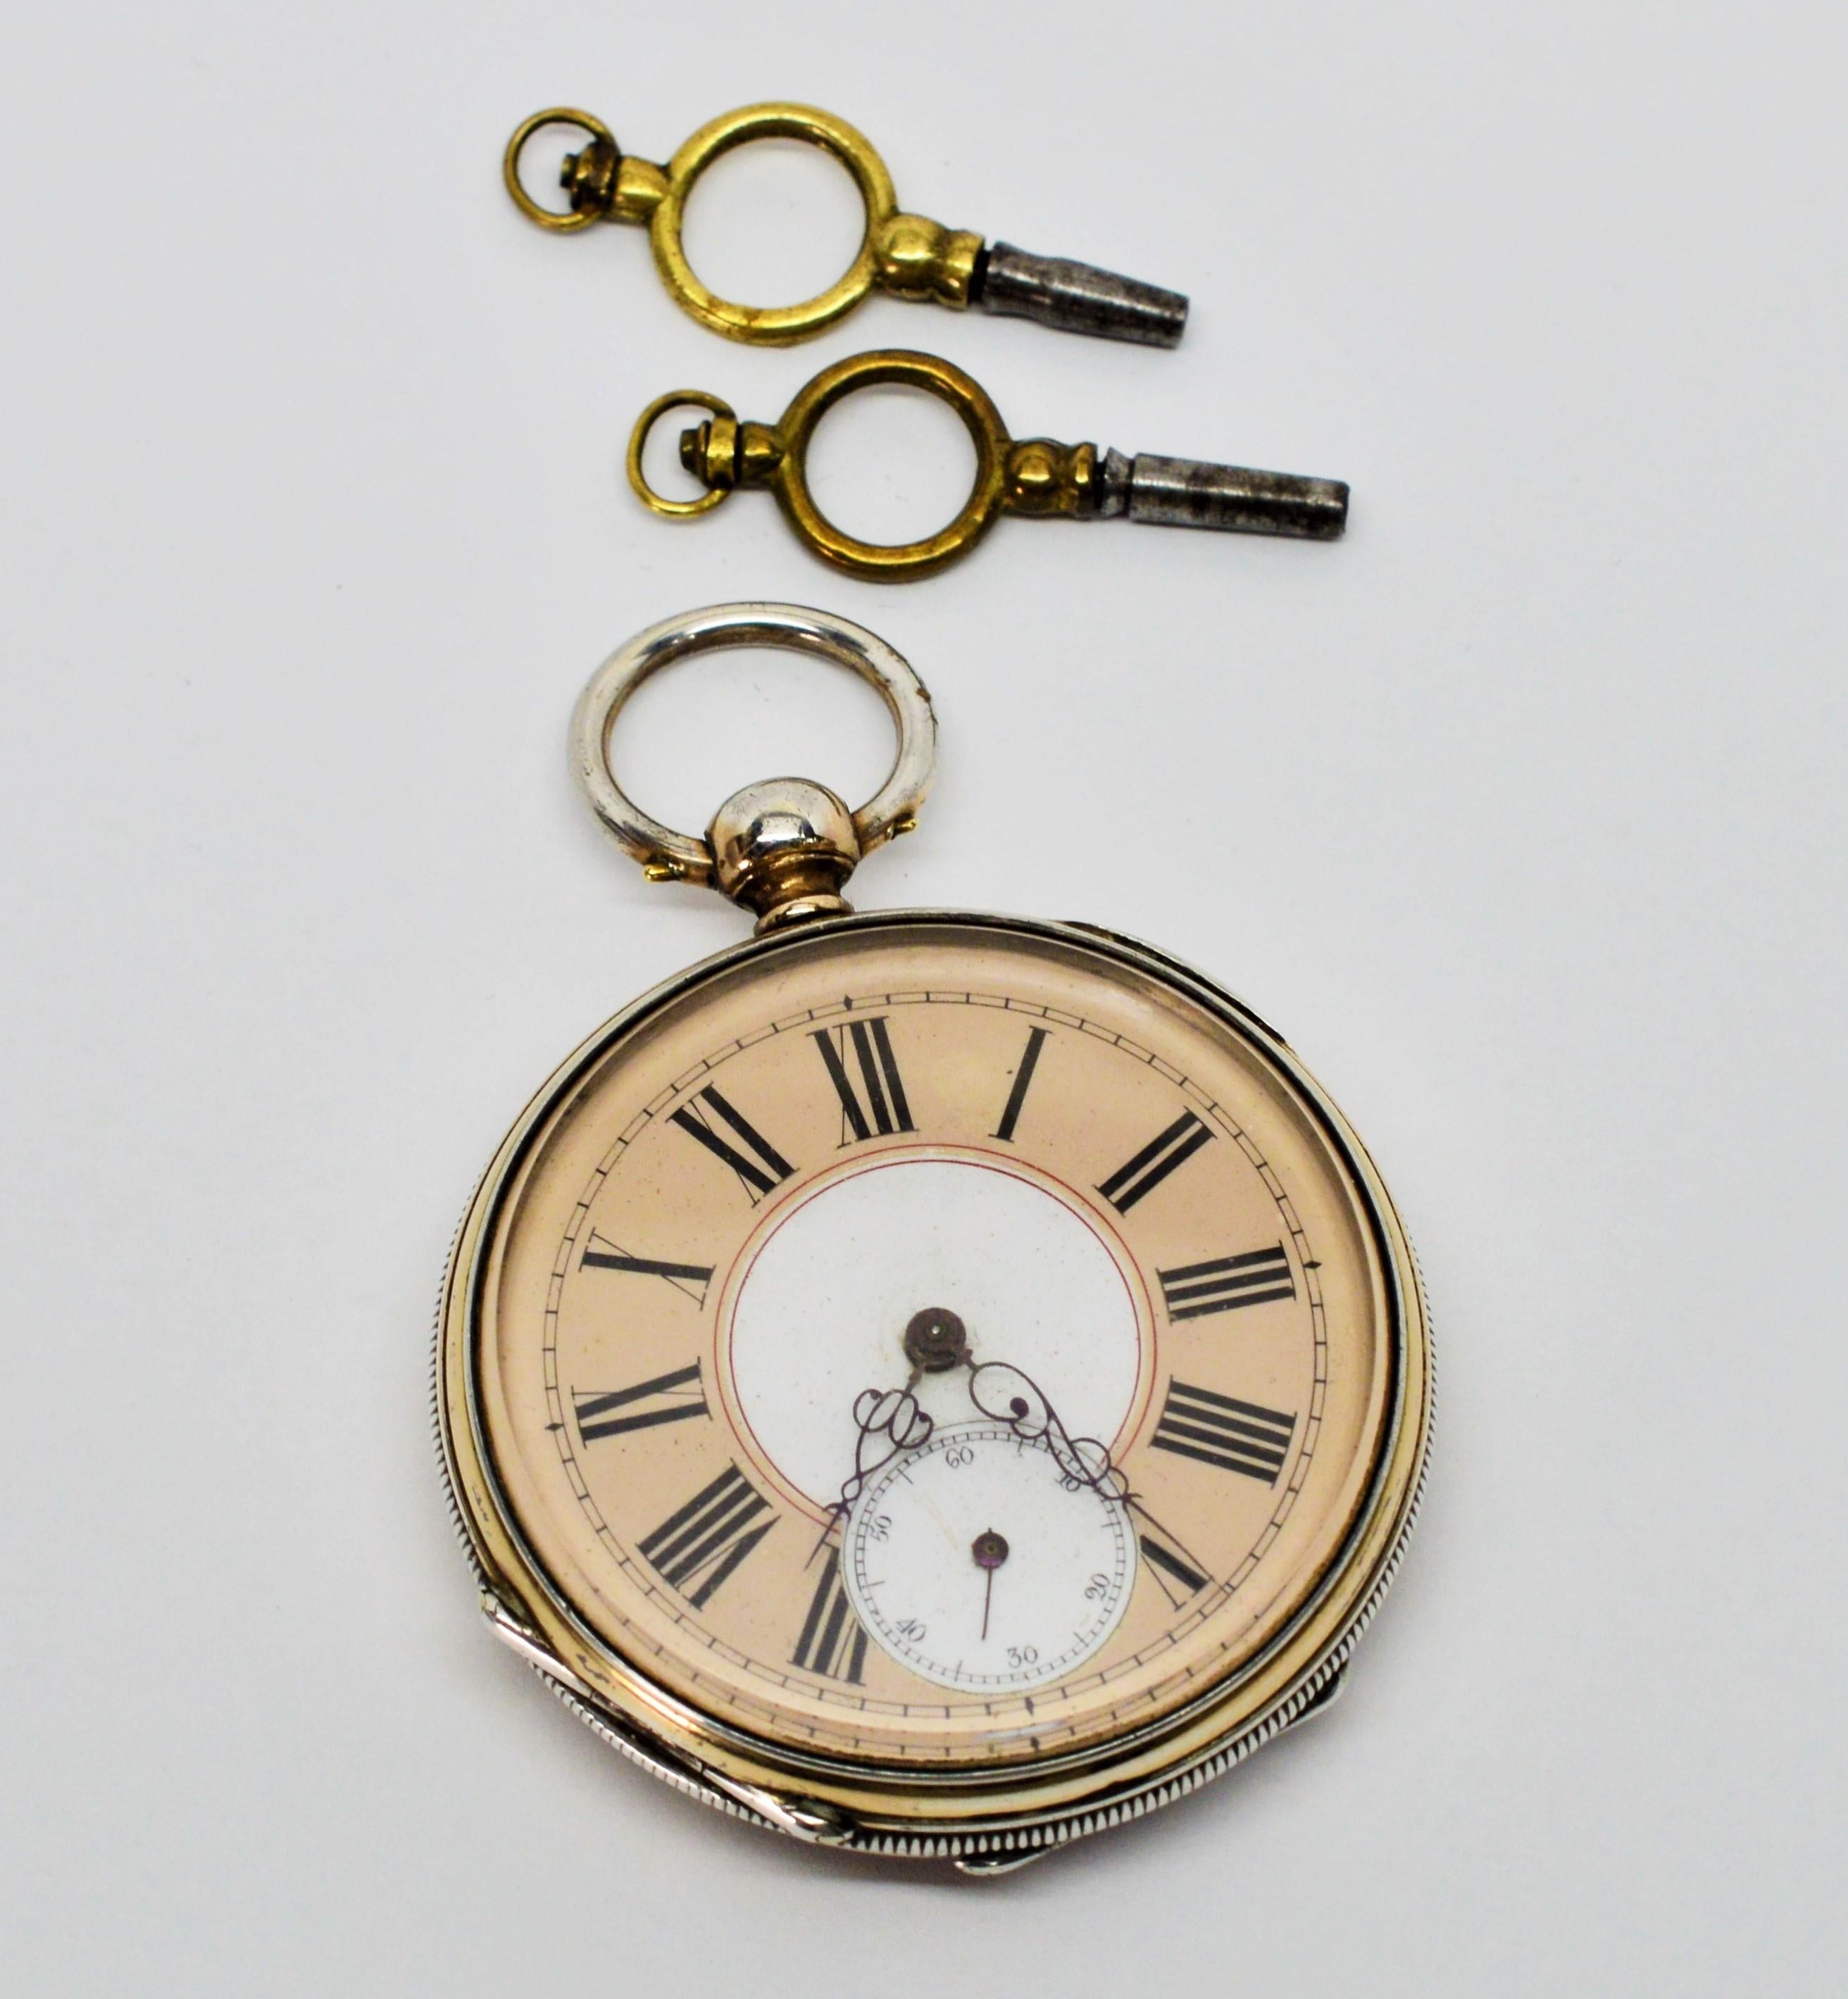 Ancre DePrecision Key Wind Sterling Silver Antique Pocket Watch 3